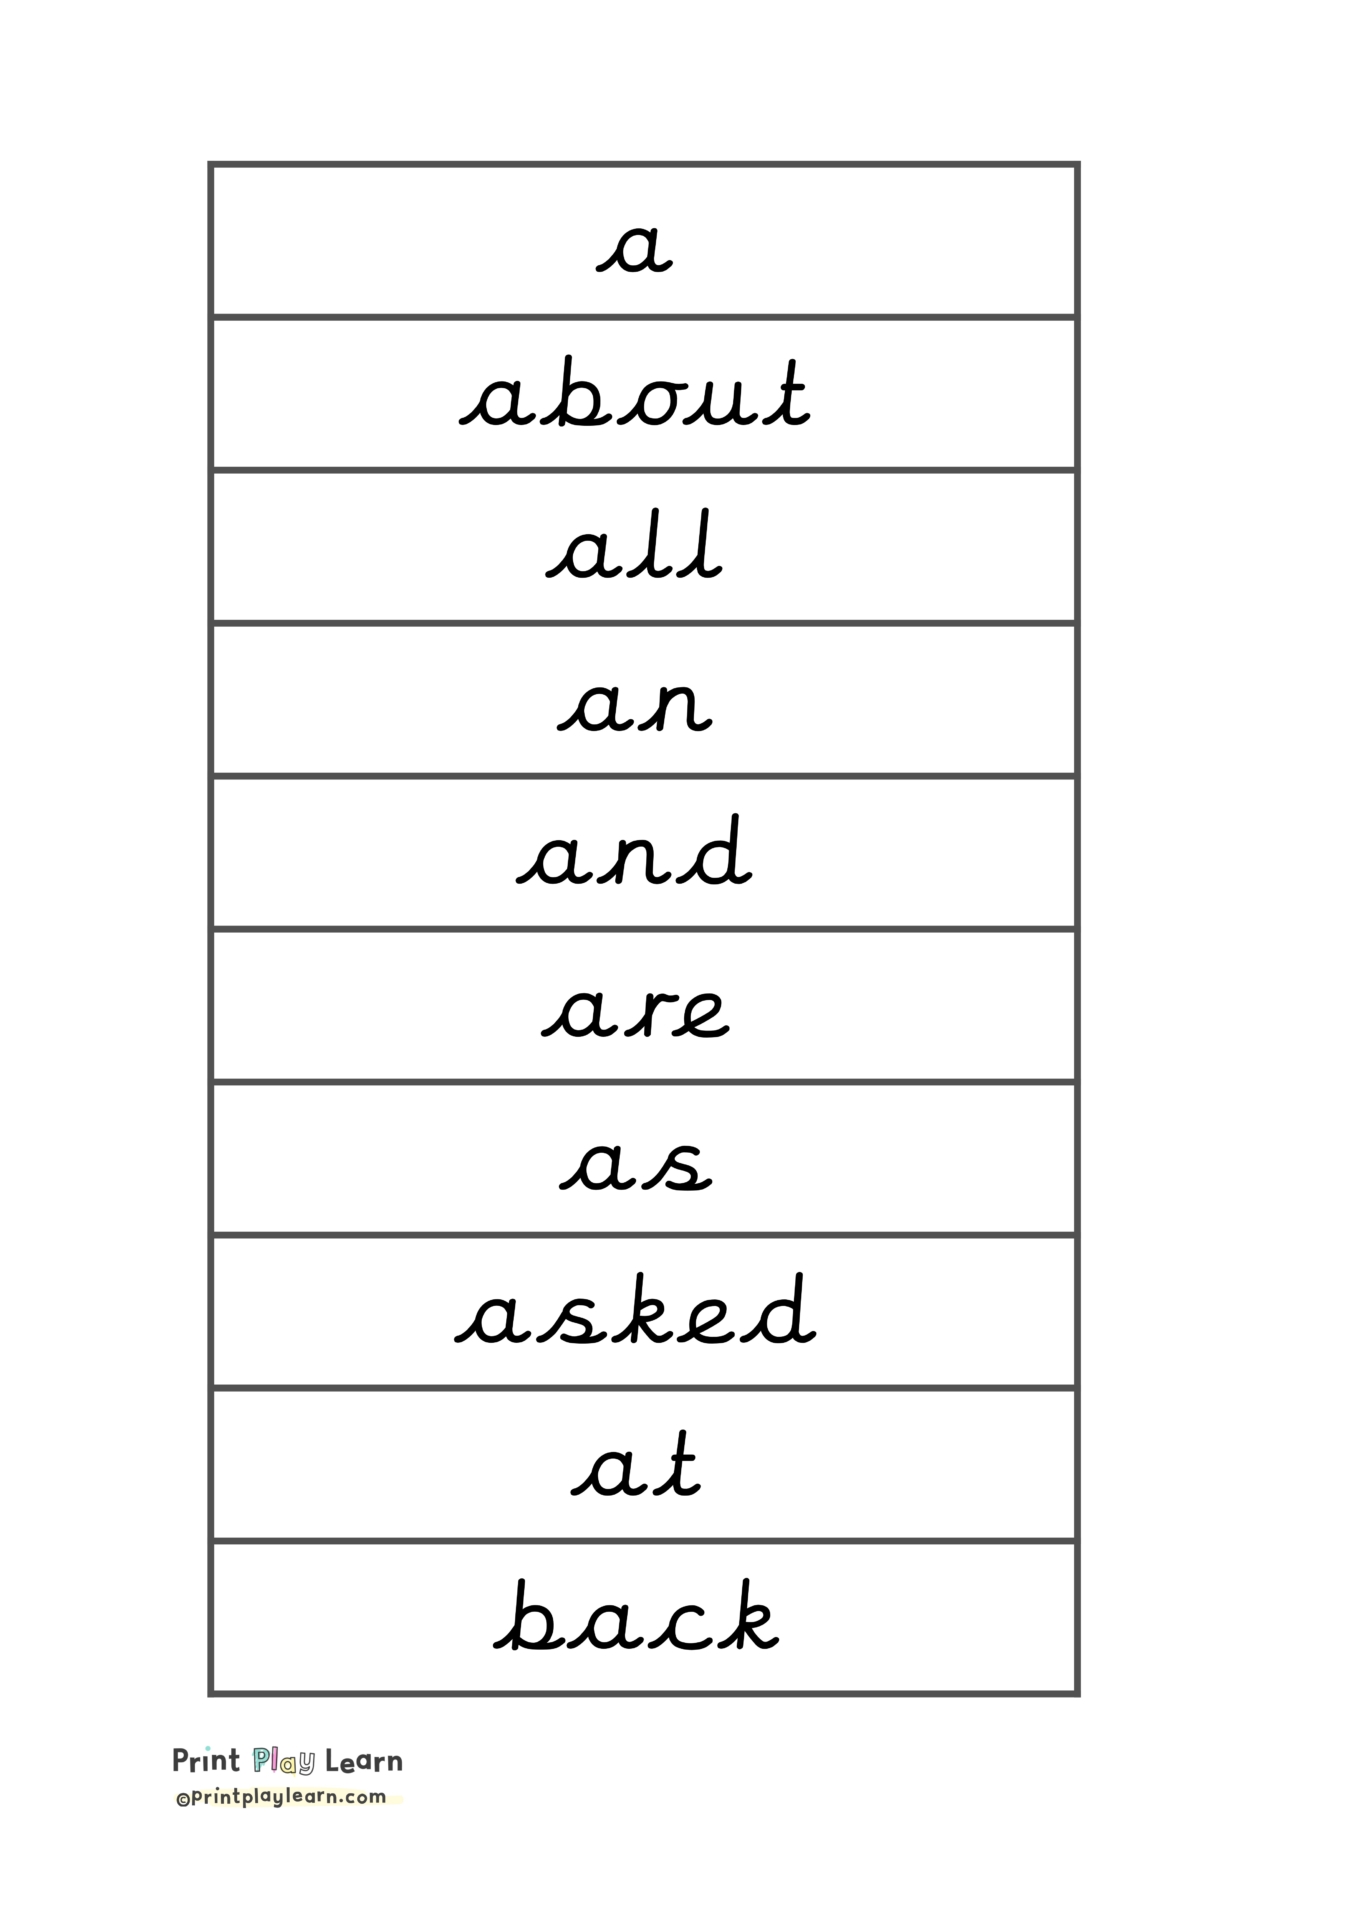 100 High Frequency Words cursive font - Printable Teaching Resources